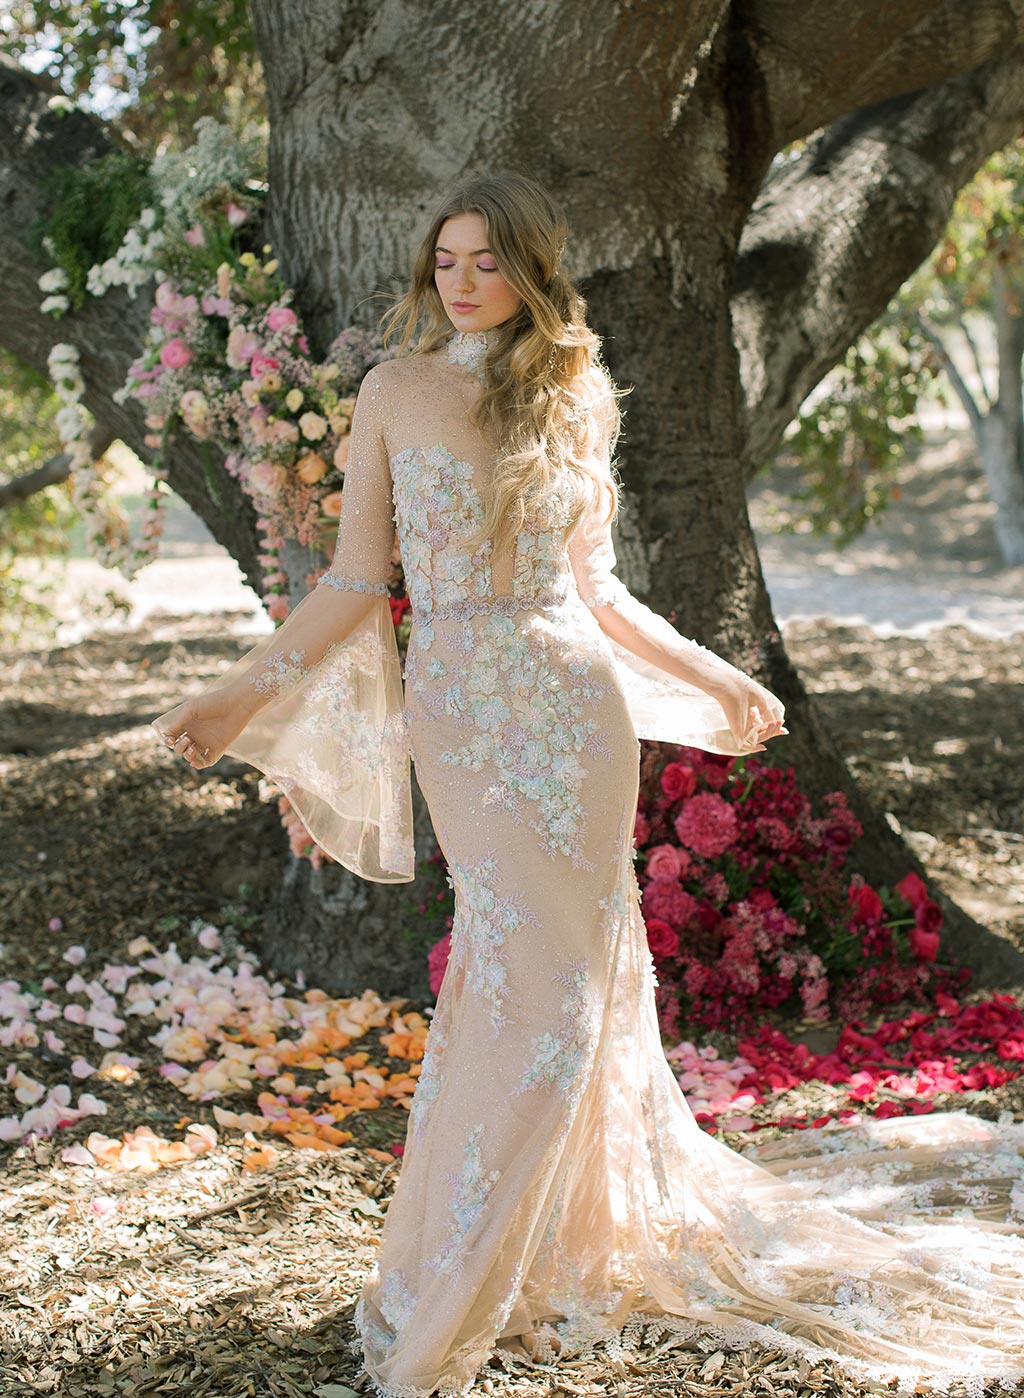 Venus colorful embroidered wedding dress by Claire Pettibone